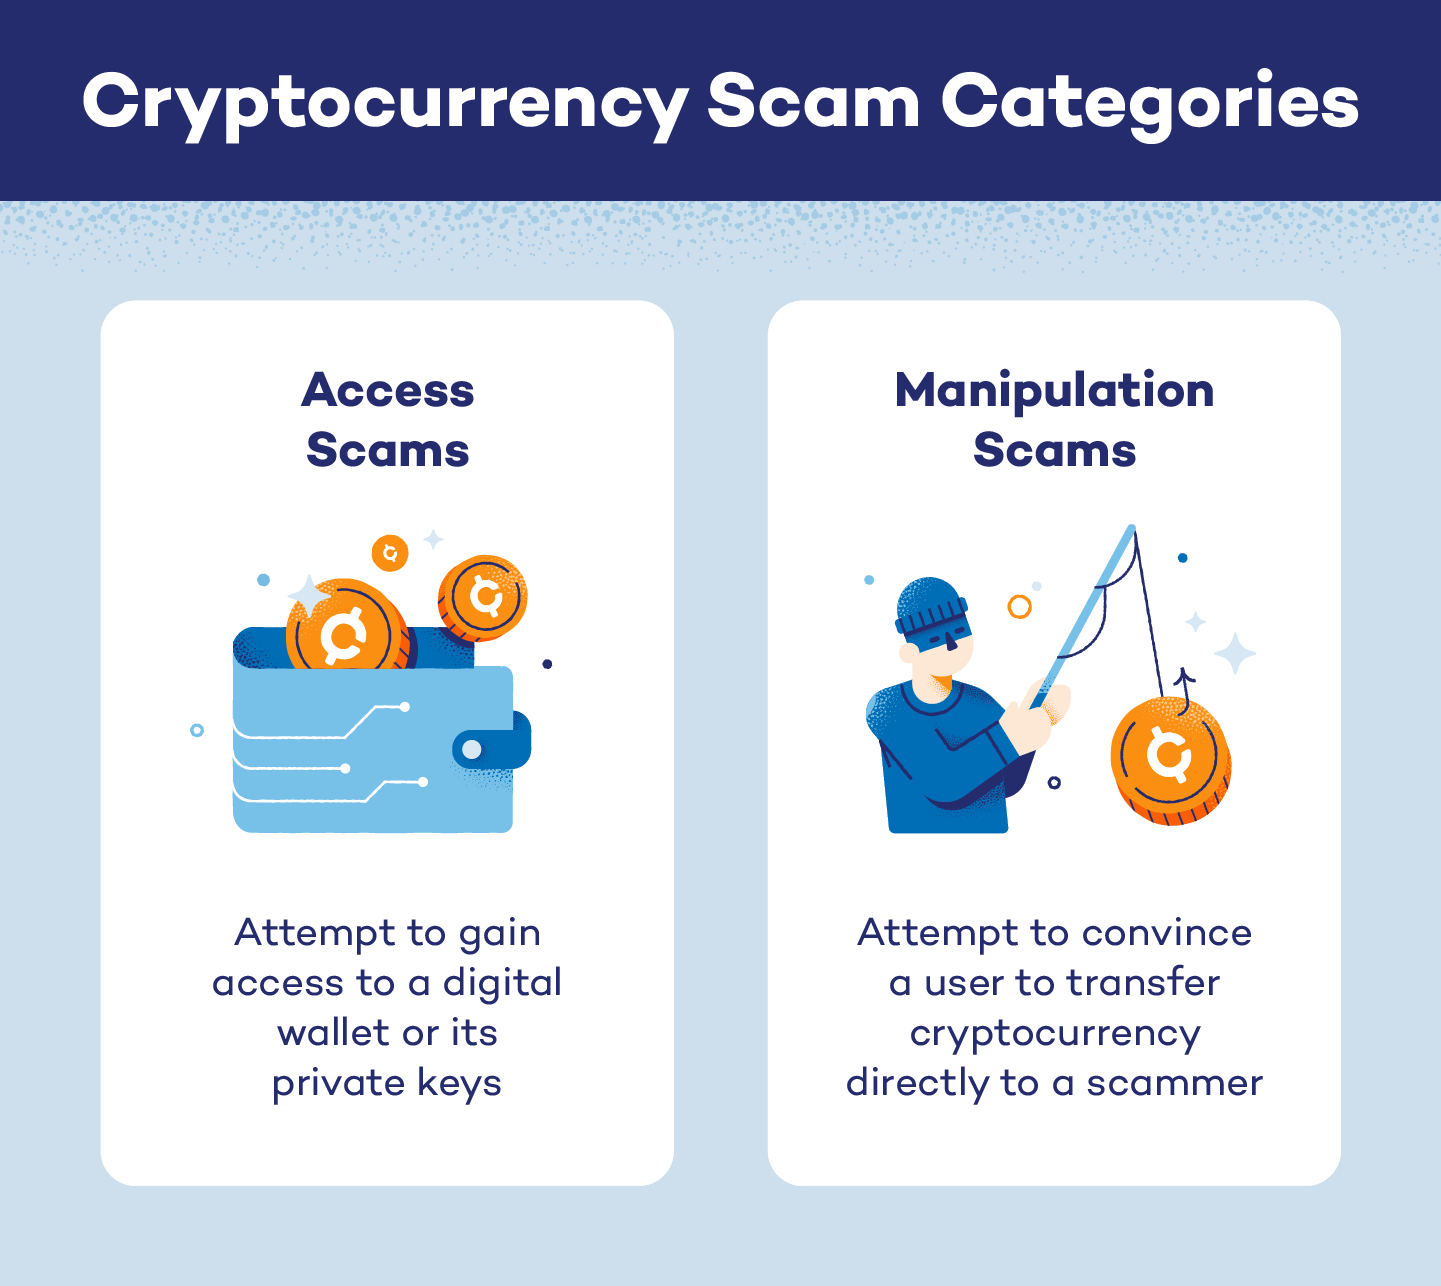 Cryptocurrency scams can fit into two main categories: access and manipulation scams.